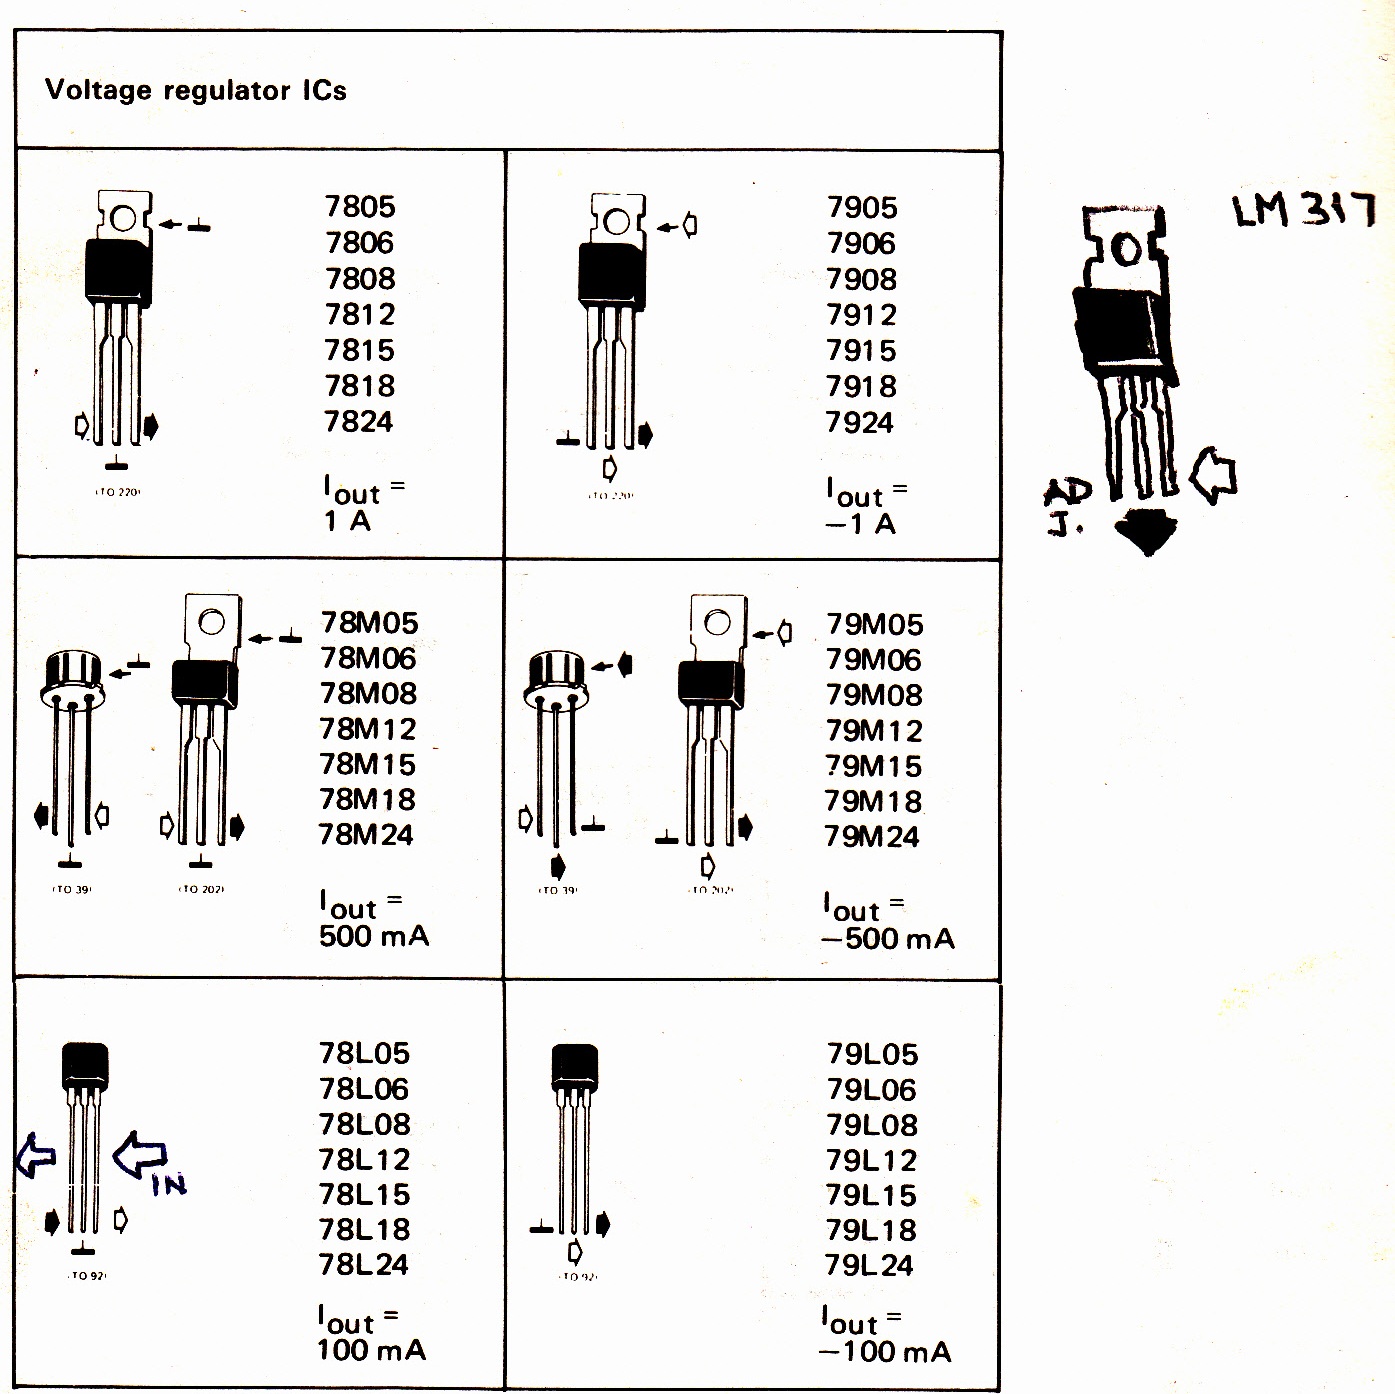 How to Understand and Use Voltage Regulator IC 7805, 7812, 7824